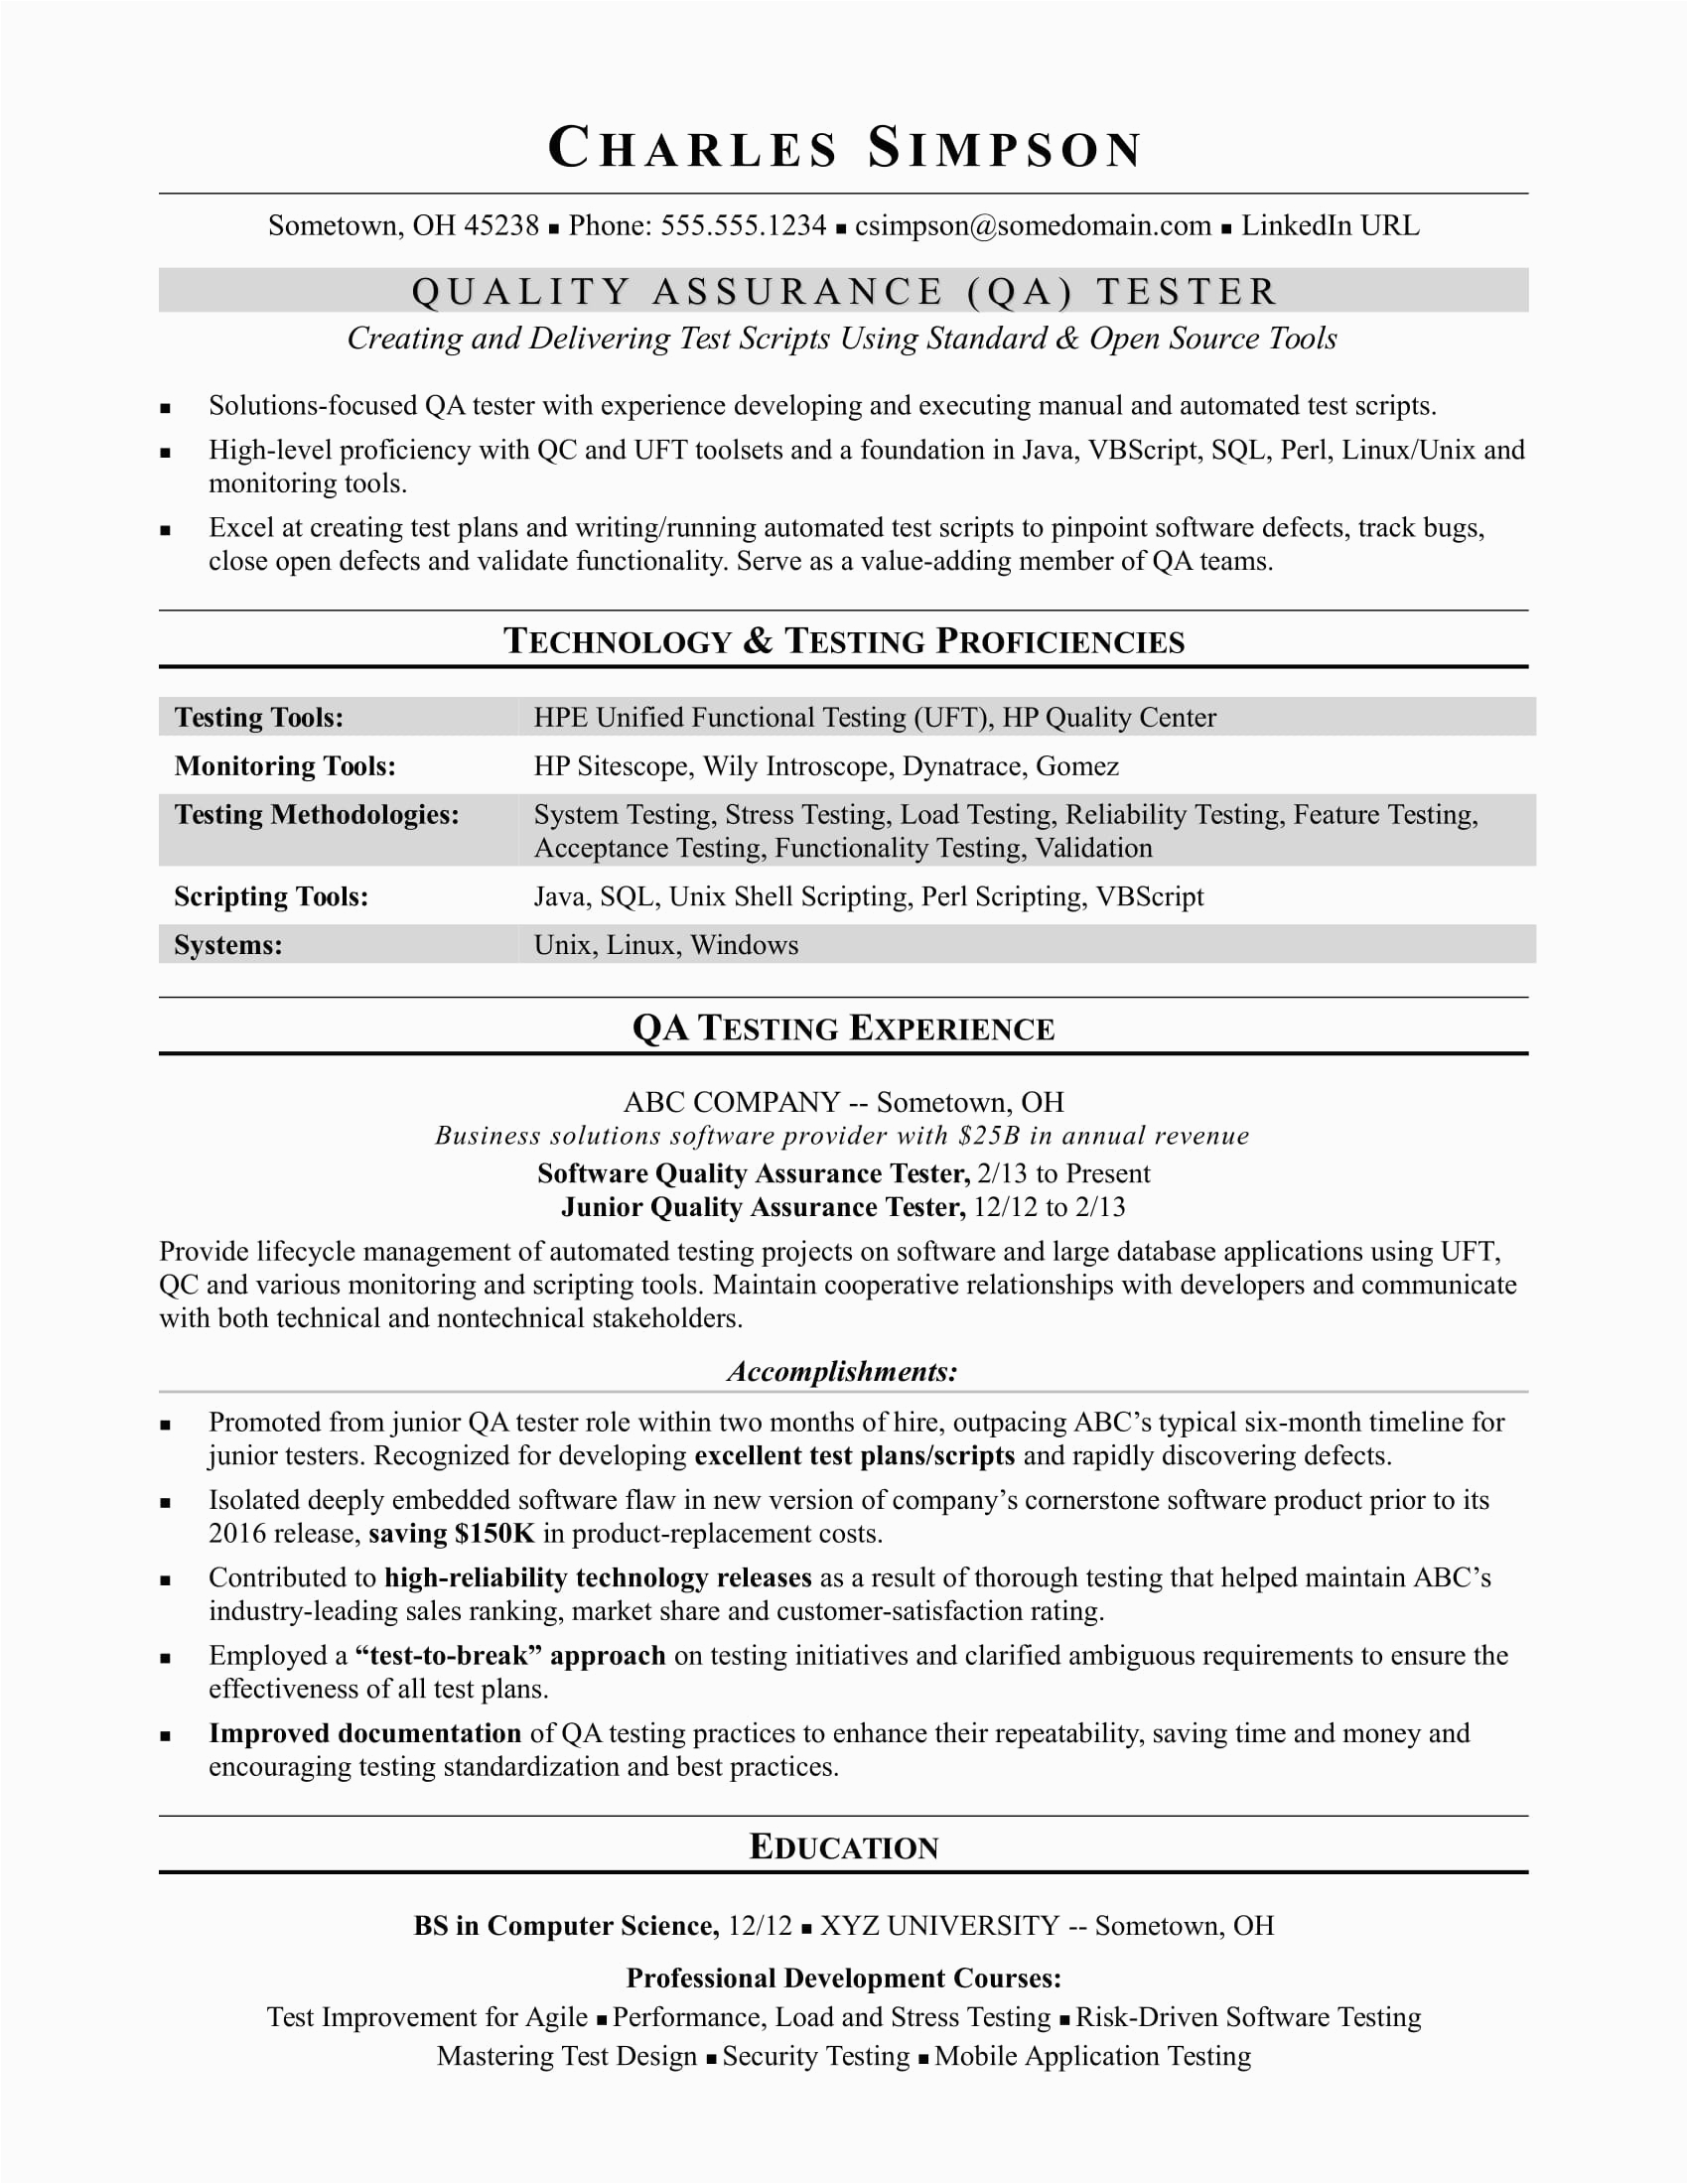 Sample Resume for An Experienced Qa software Tester Sample Resume for A Midlevel Qa software Tester